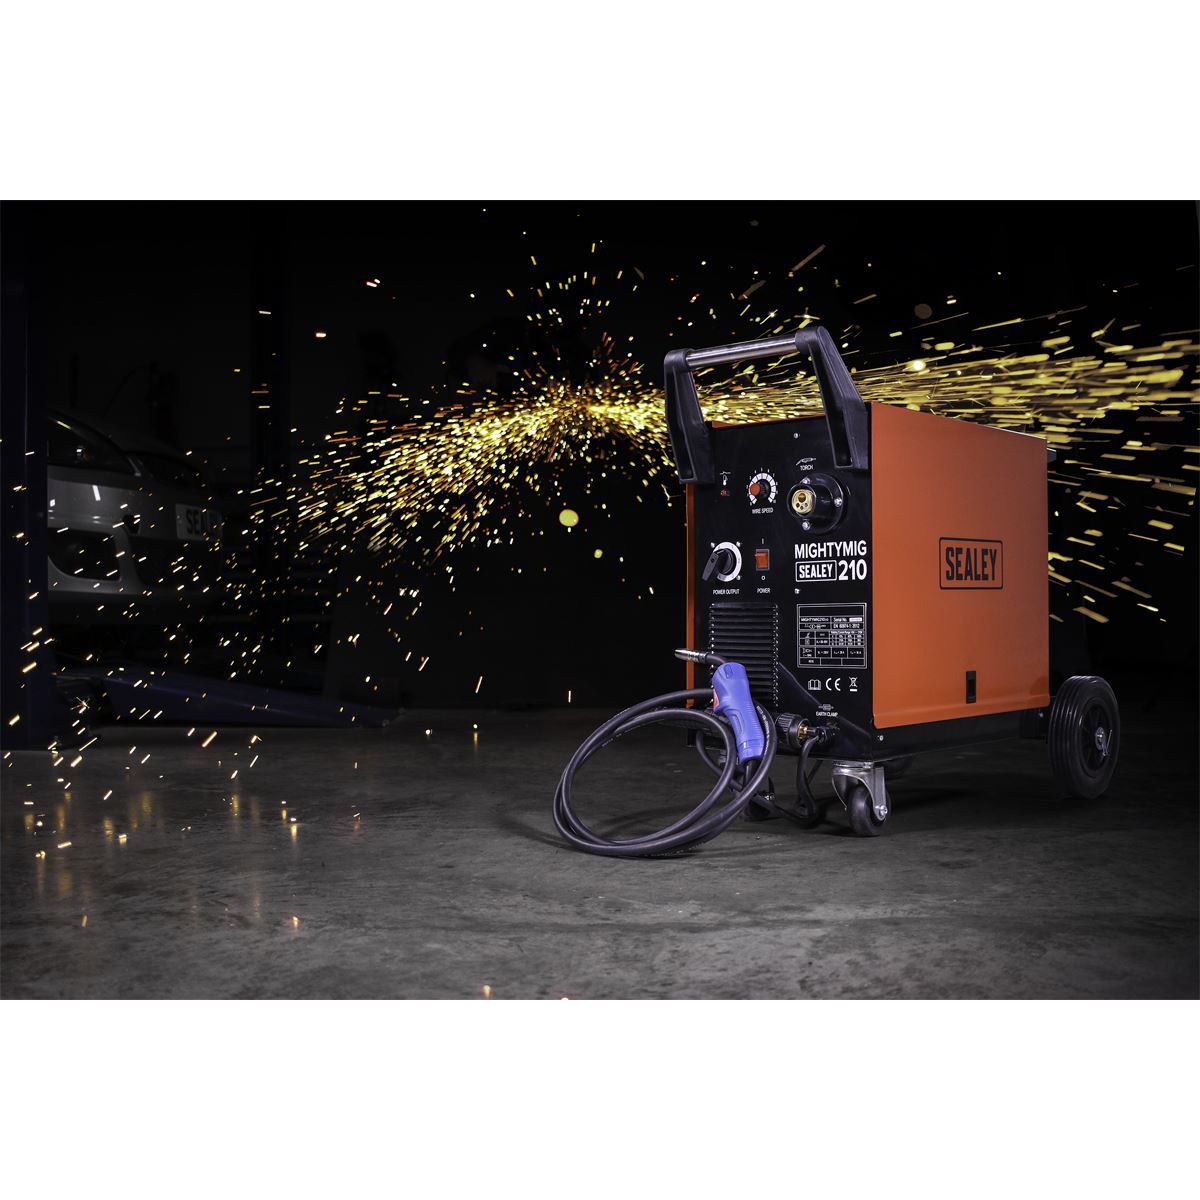 Sealey Professional Gas/No-Gas MIG Welder 210A with Euro Torch